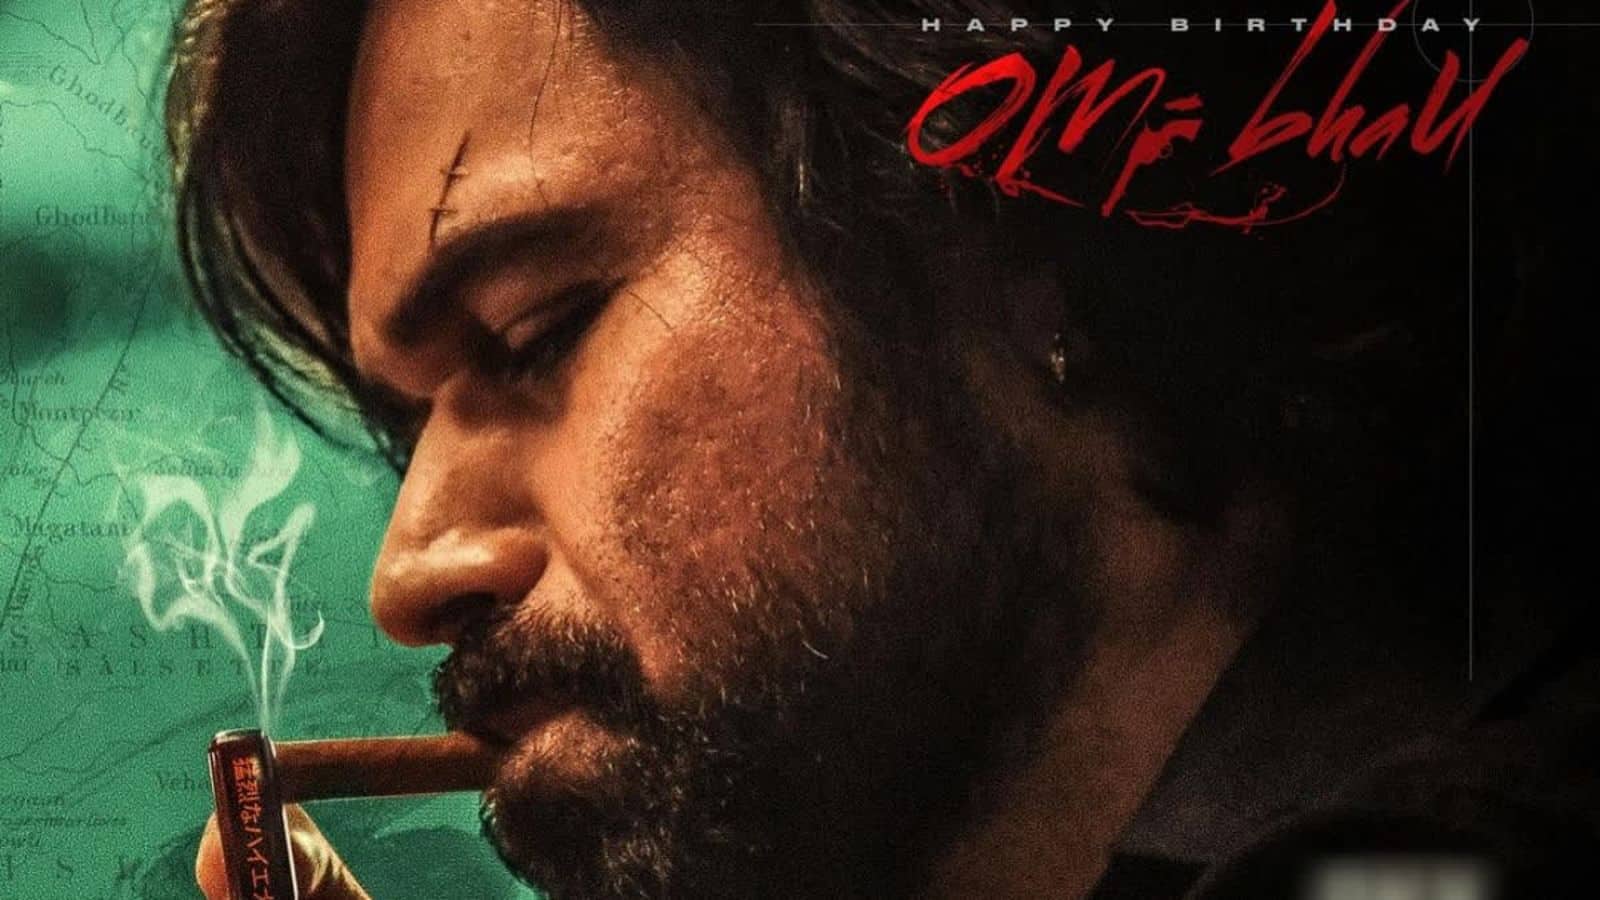 'OG': Emraan Hashmi's first look unveiled in riveting new poster